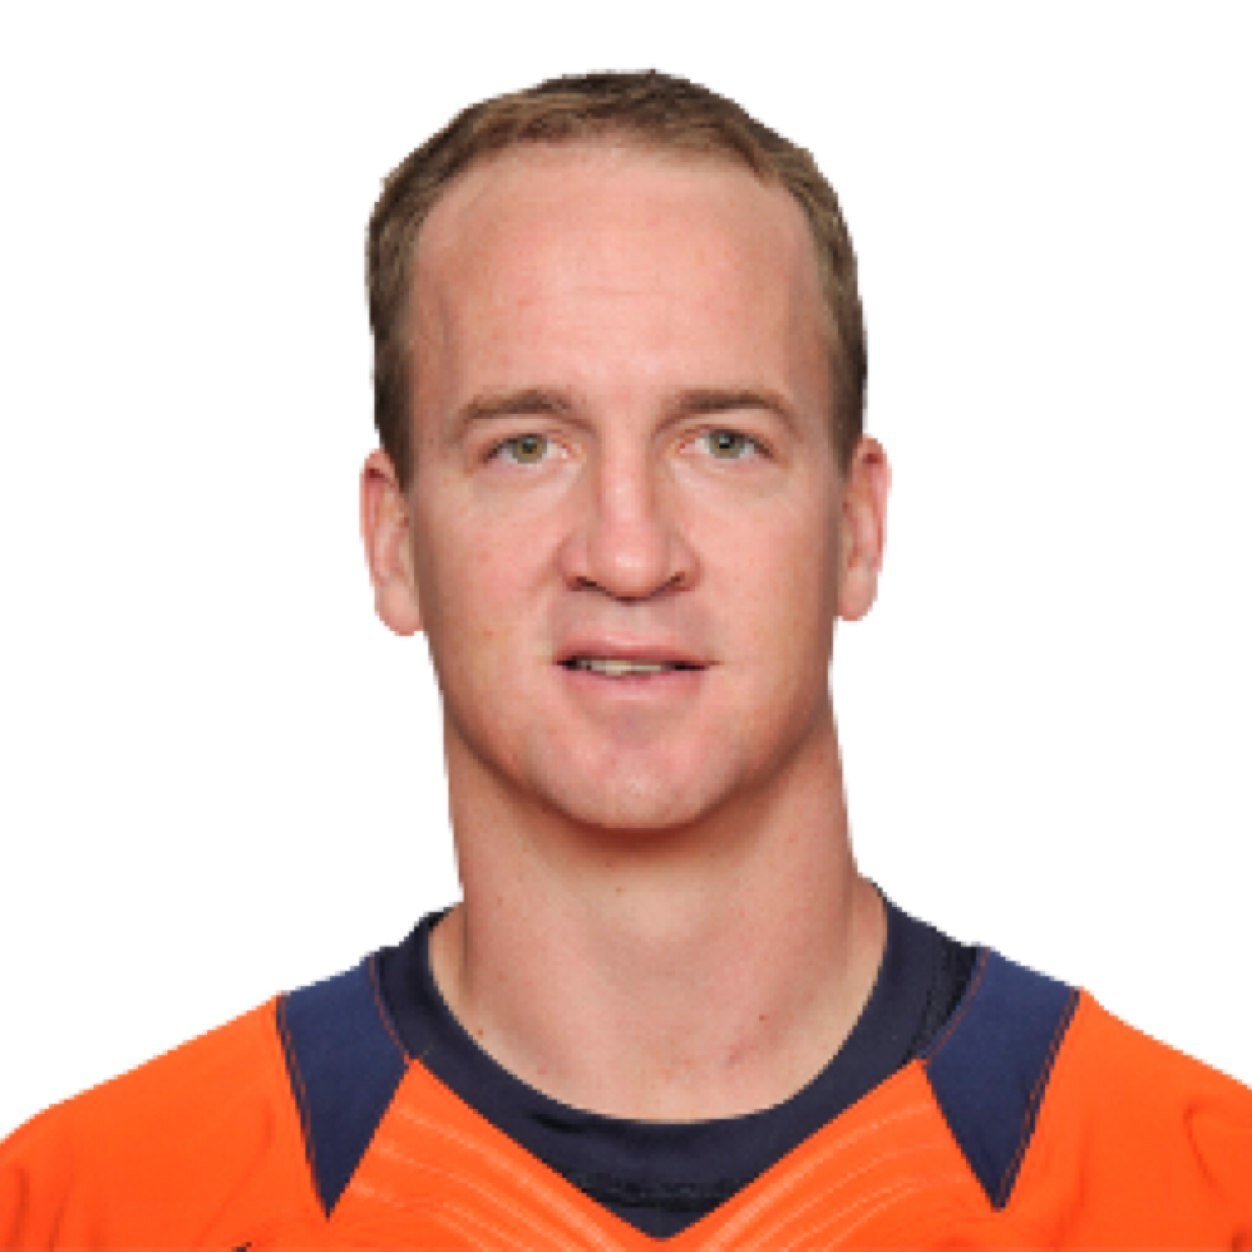 QB for the Denver Broncos. The Official Twitter Account of Peyton Manning. Im still a Colt at heart.